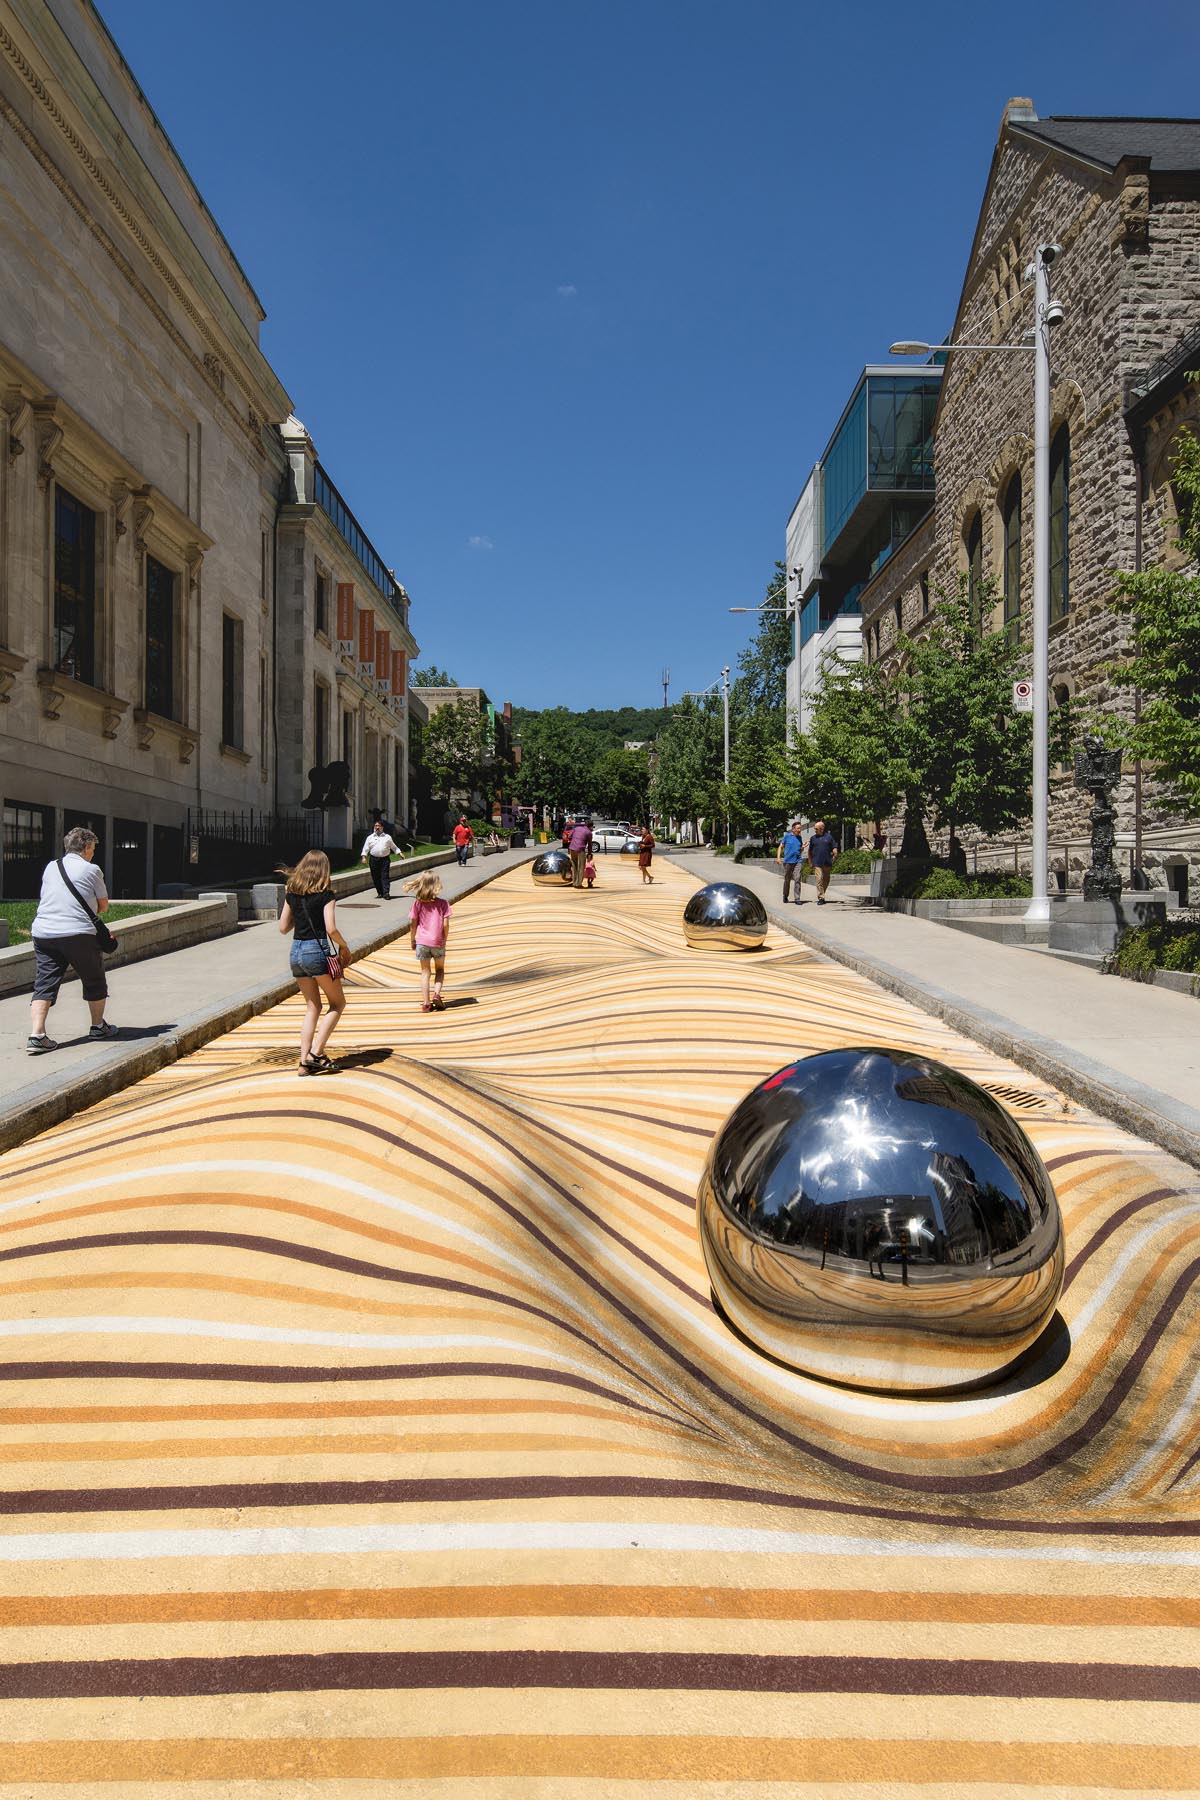 A public mural in Montreal that manipulates the street surface and creates the illusion of large ripples.